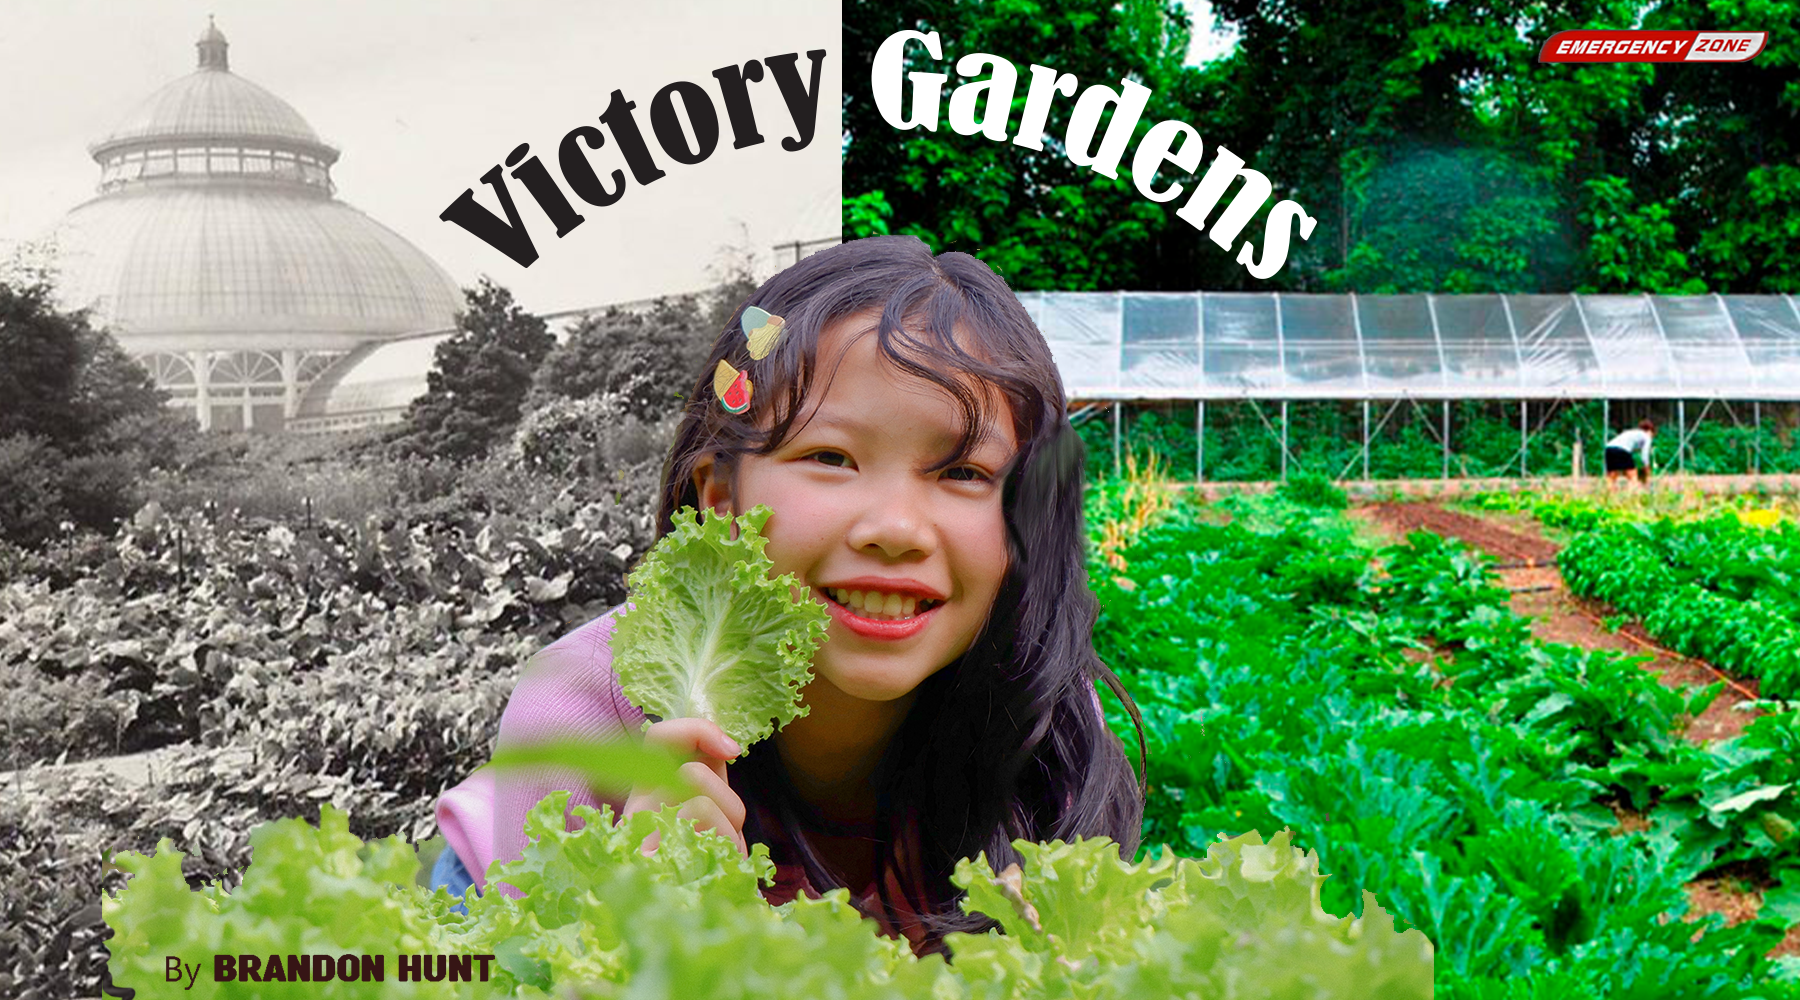 The Victory Garden: A Sensible Way to Grow Your Own Survival Food